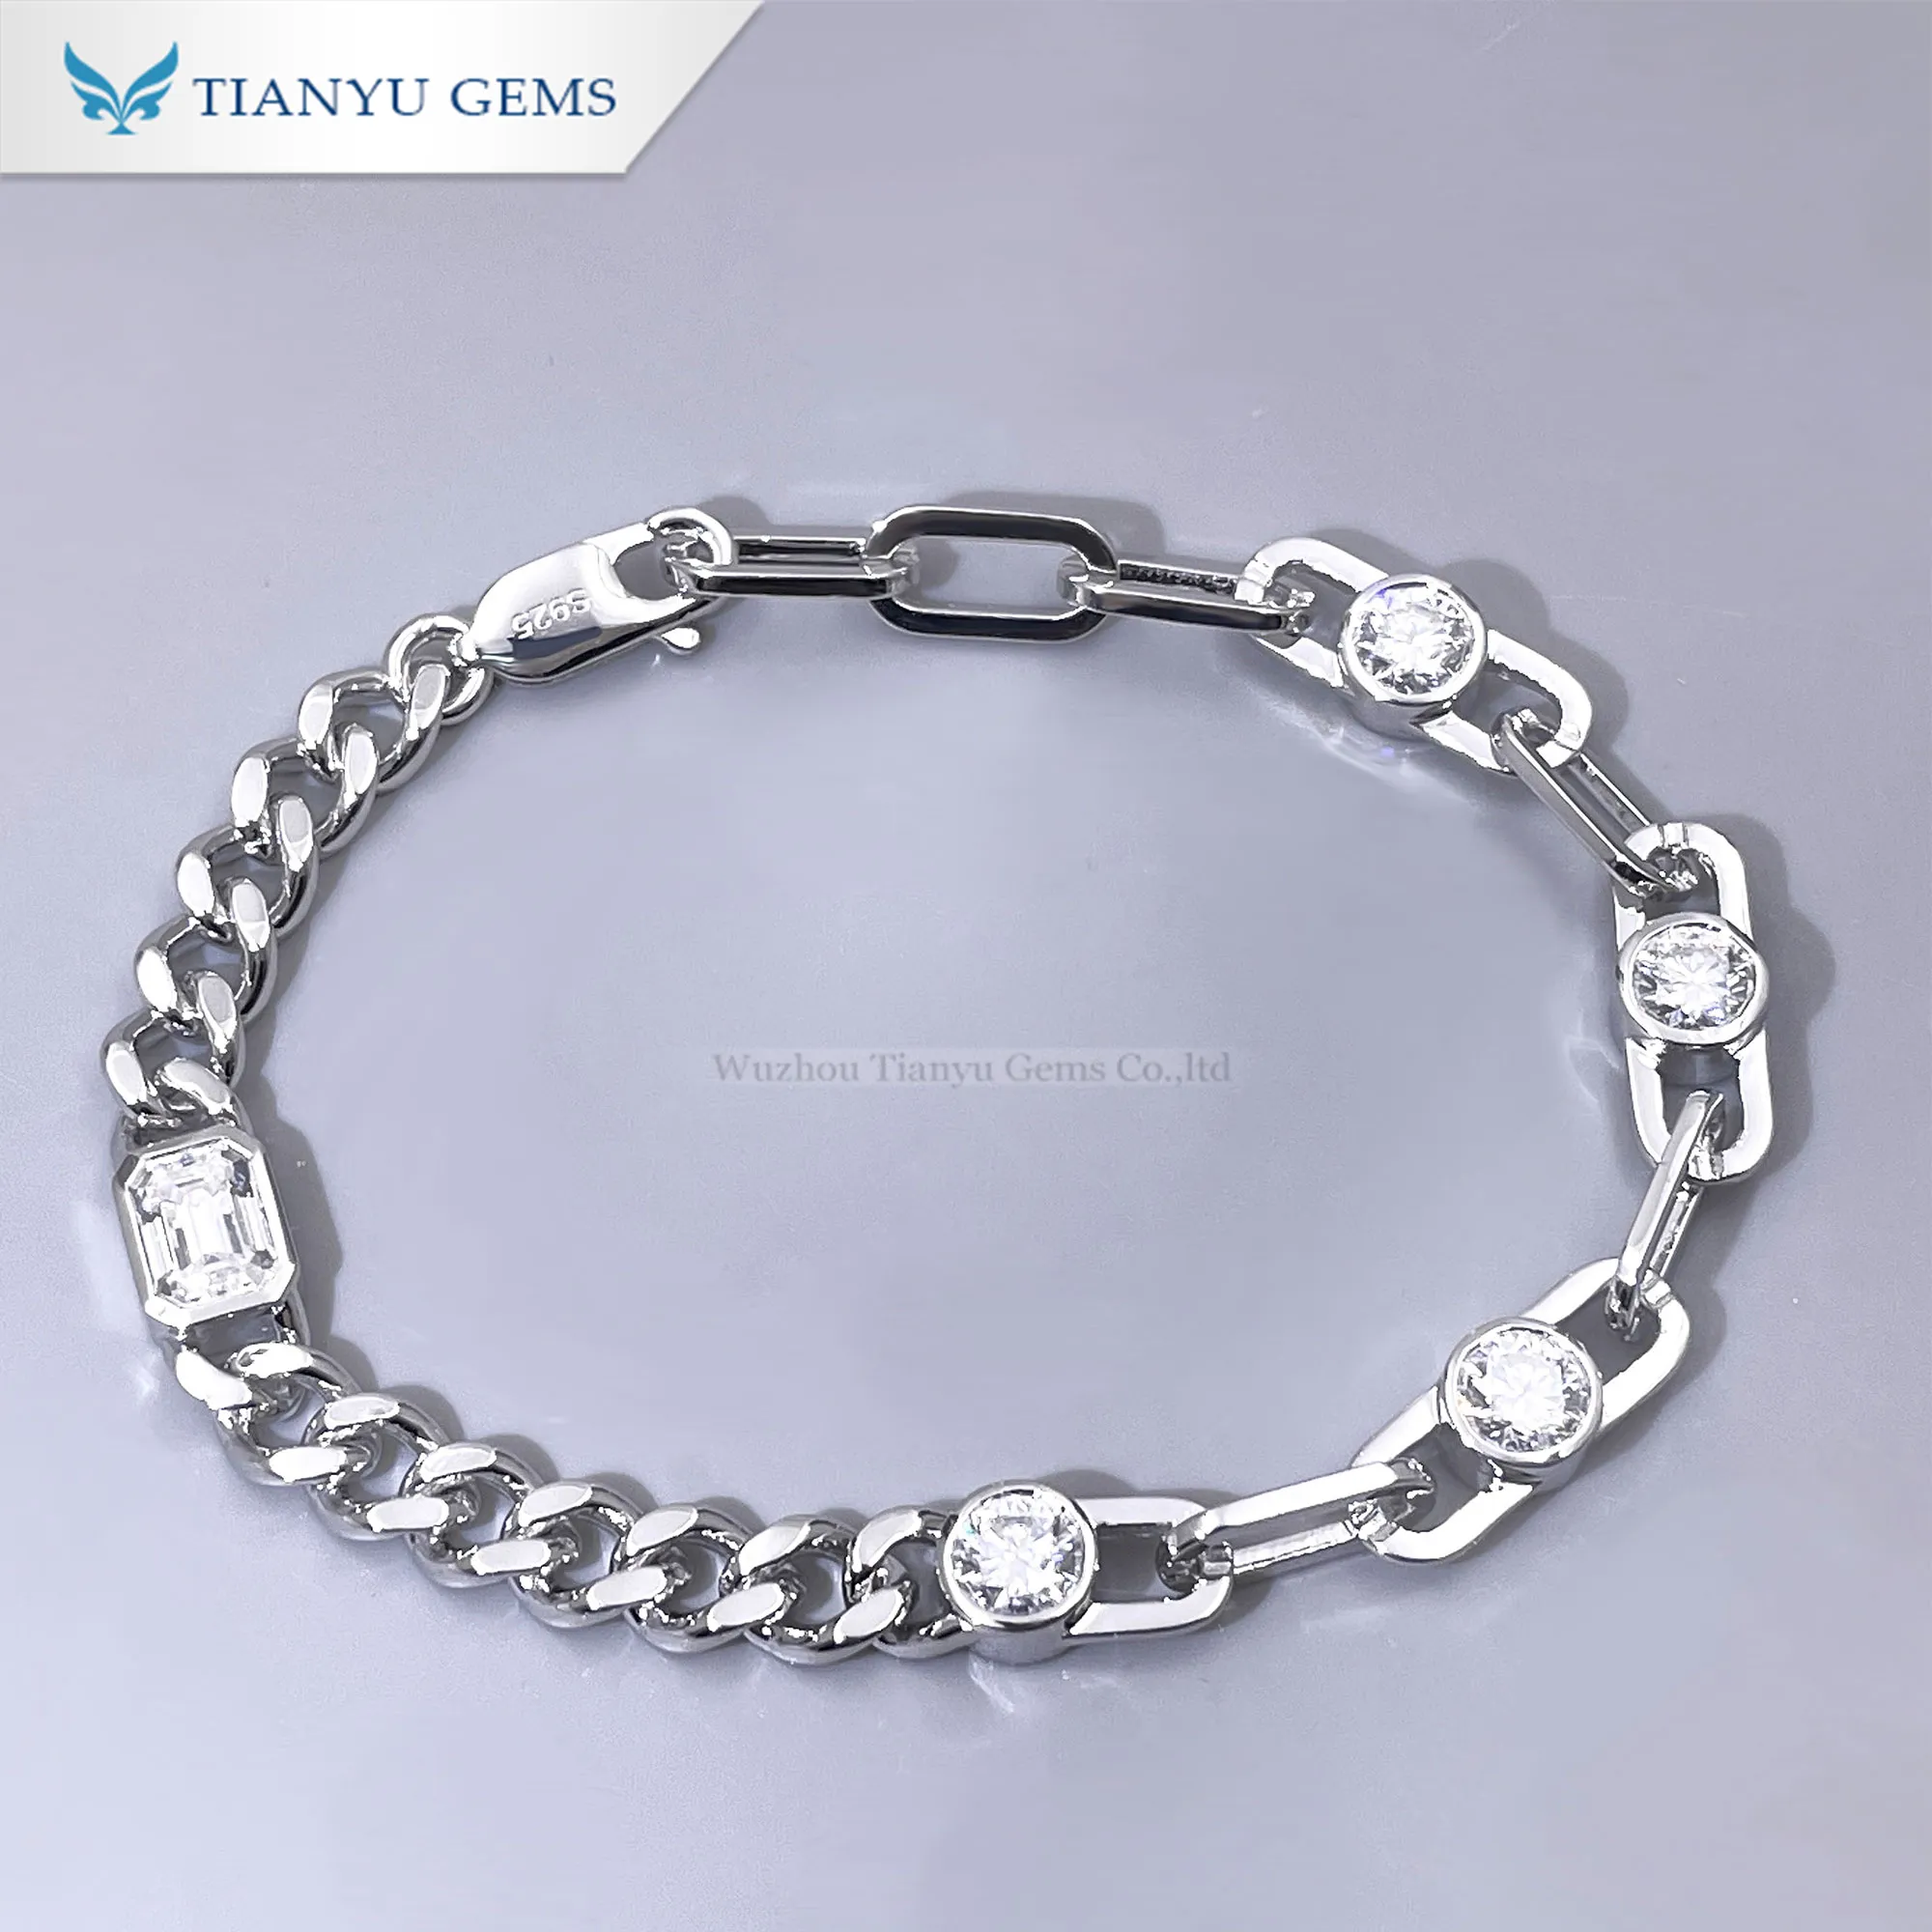 Tianyu Gems customized silver and gold material men's bracelet